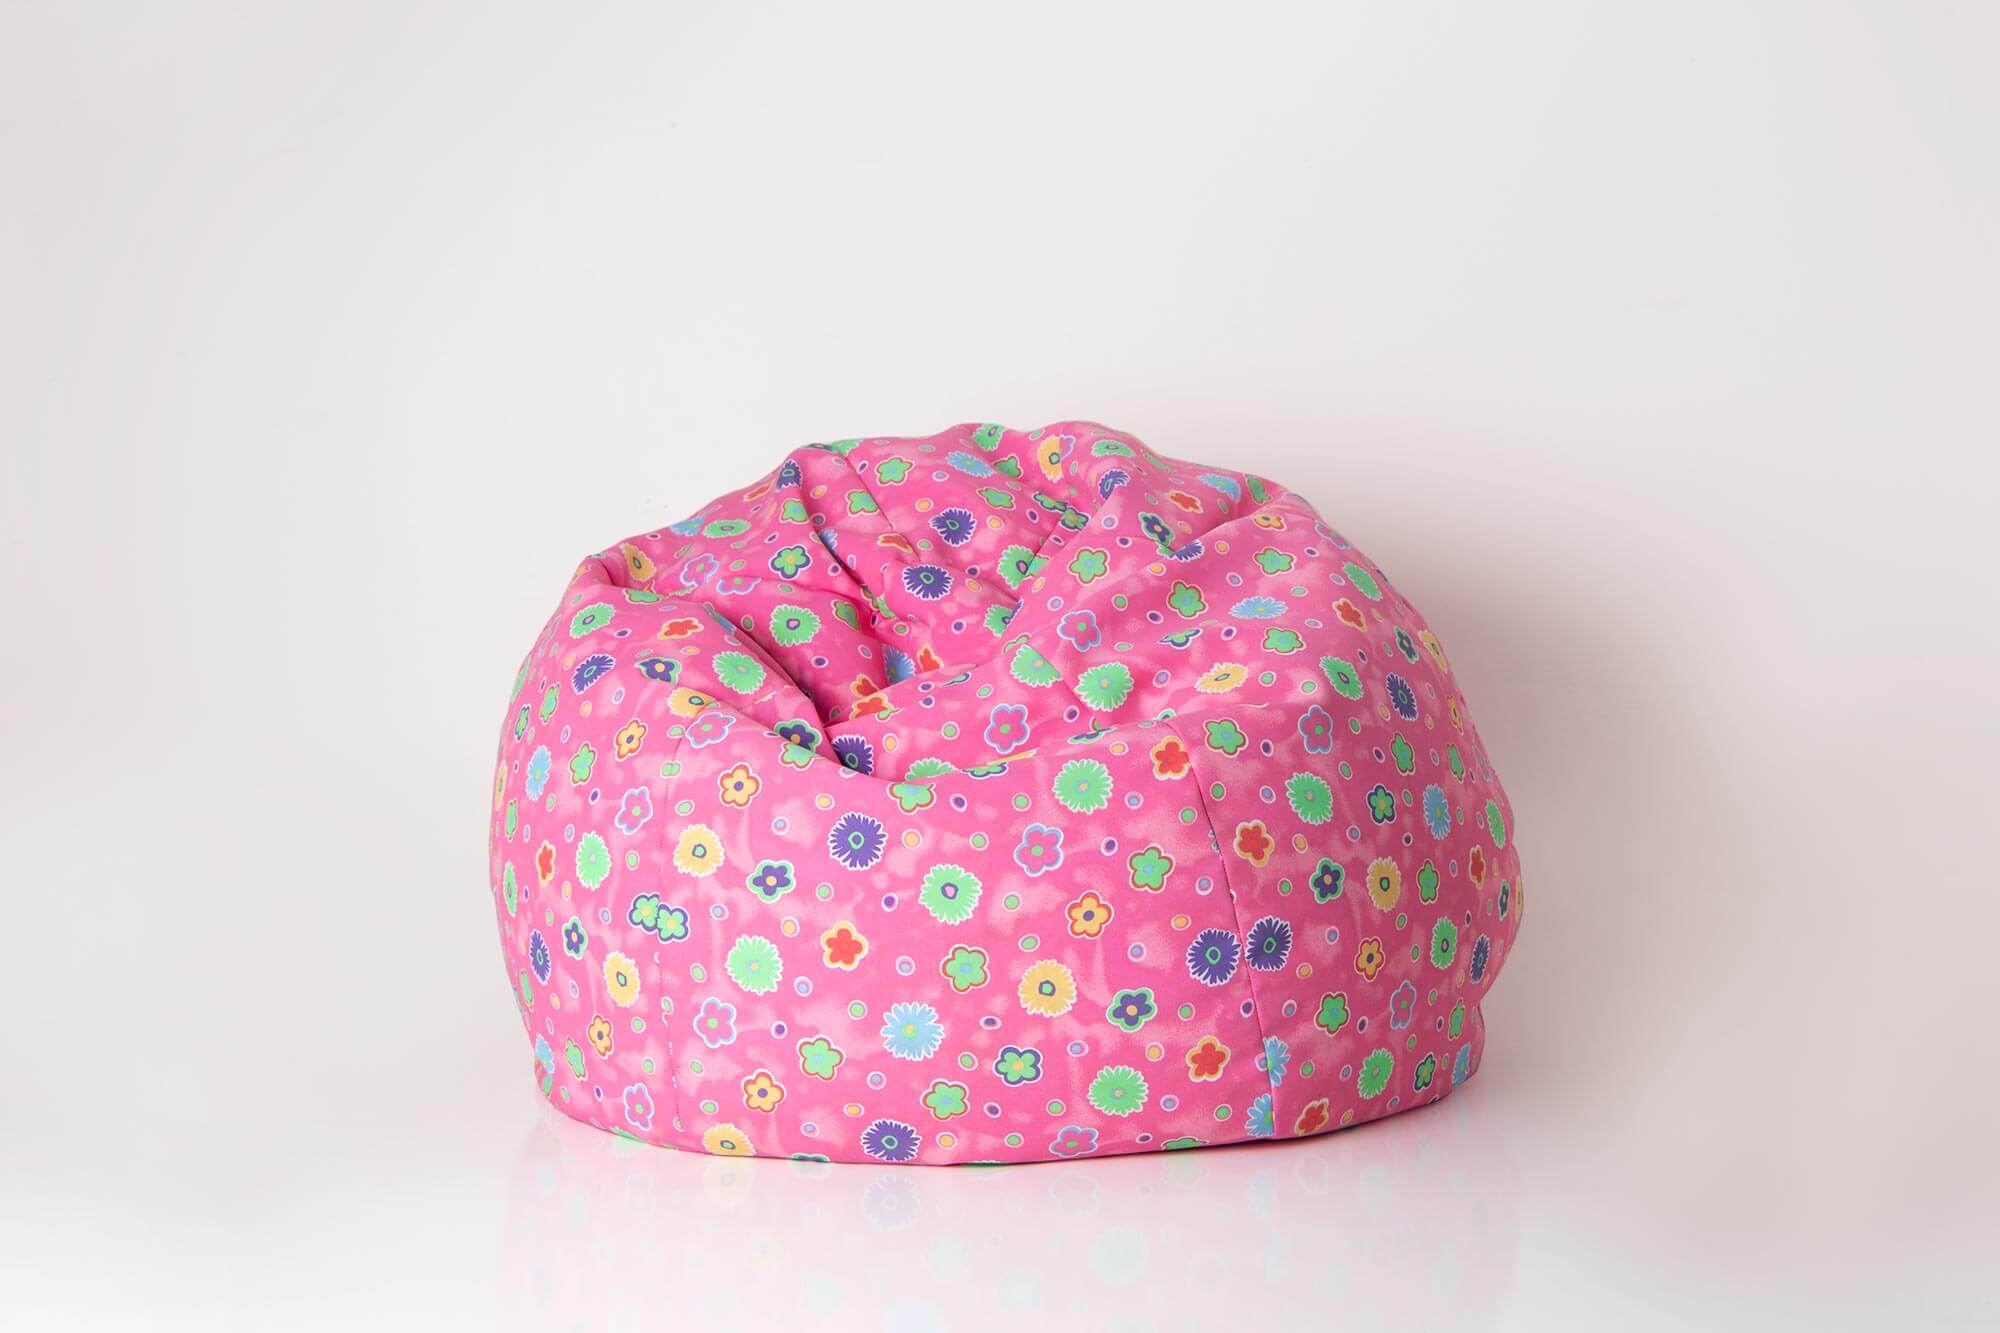 The Best Bean Bag Chairs Of 2021 Reviews By Your Best Digs